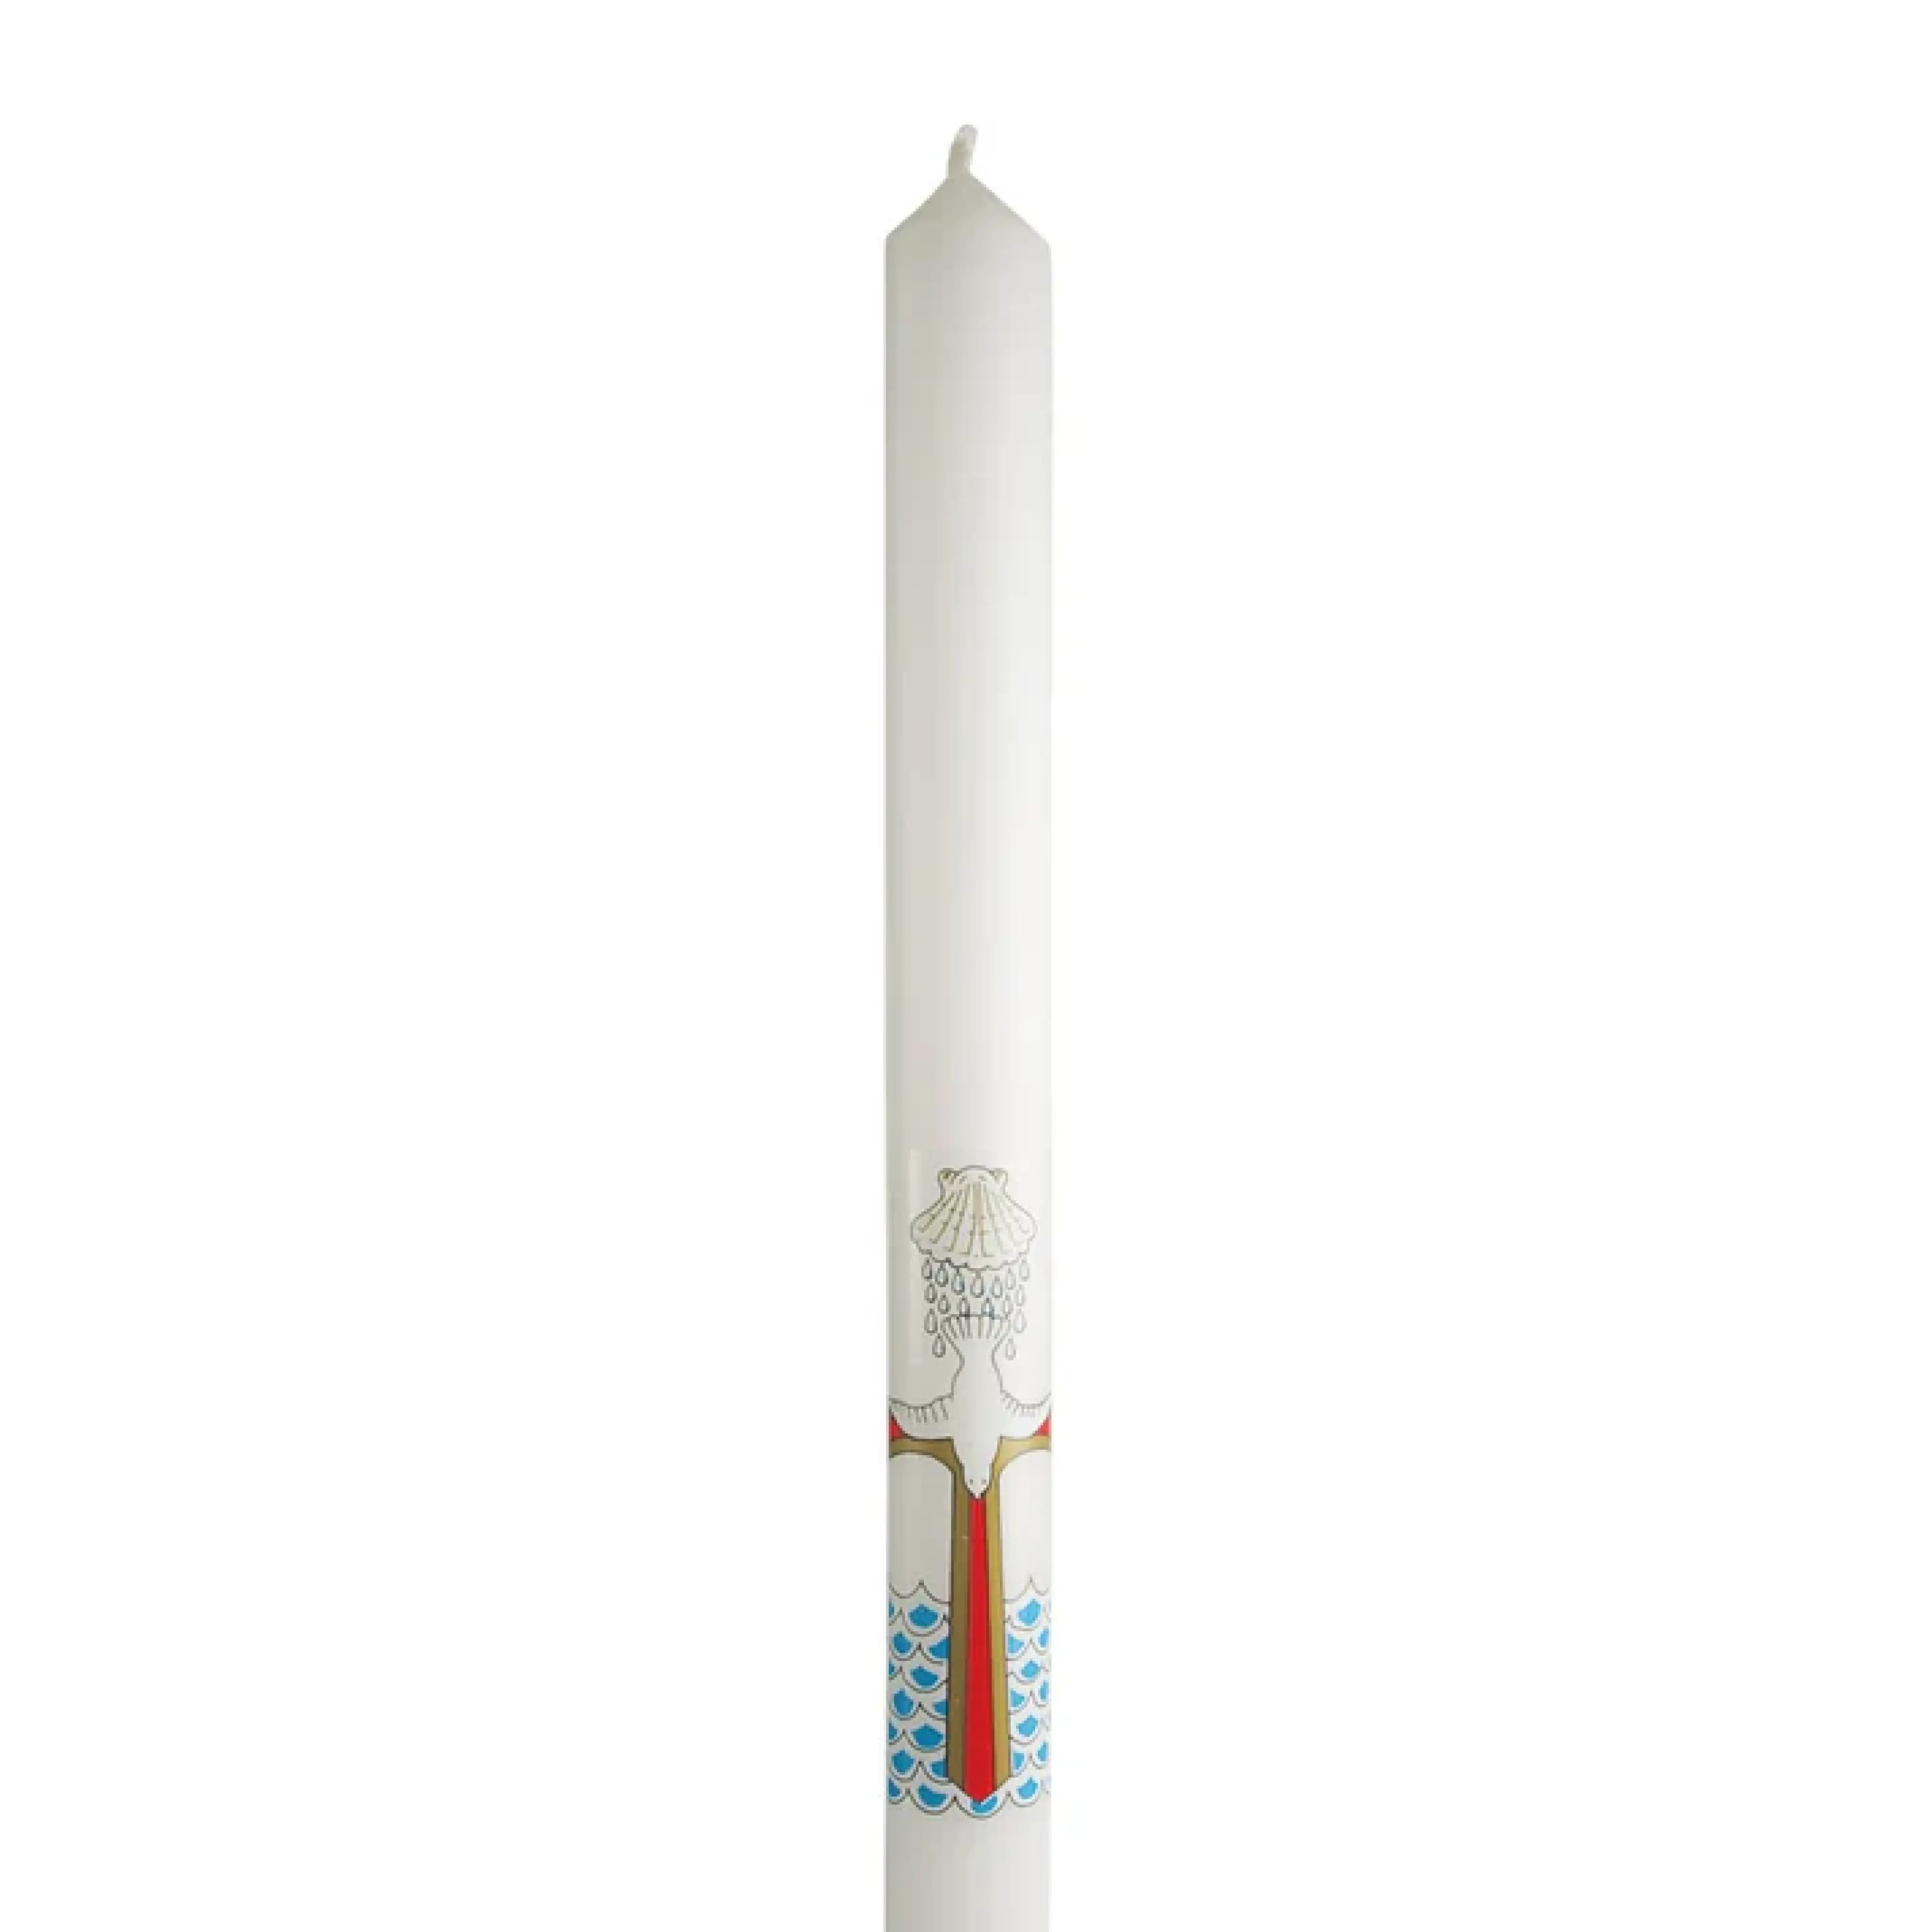 12 x 7/8" Baptismal Candle- White Cathedral - Single